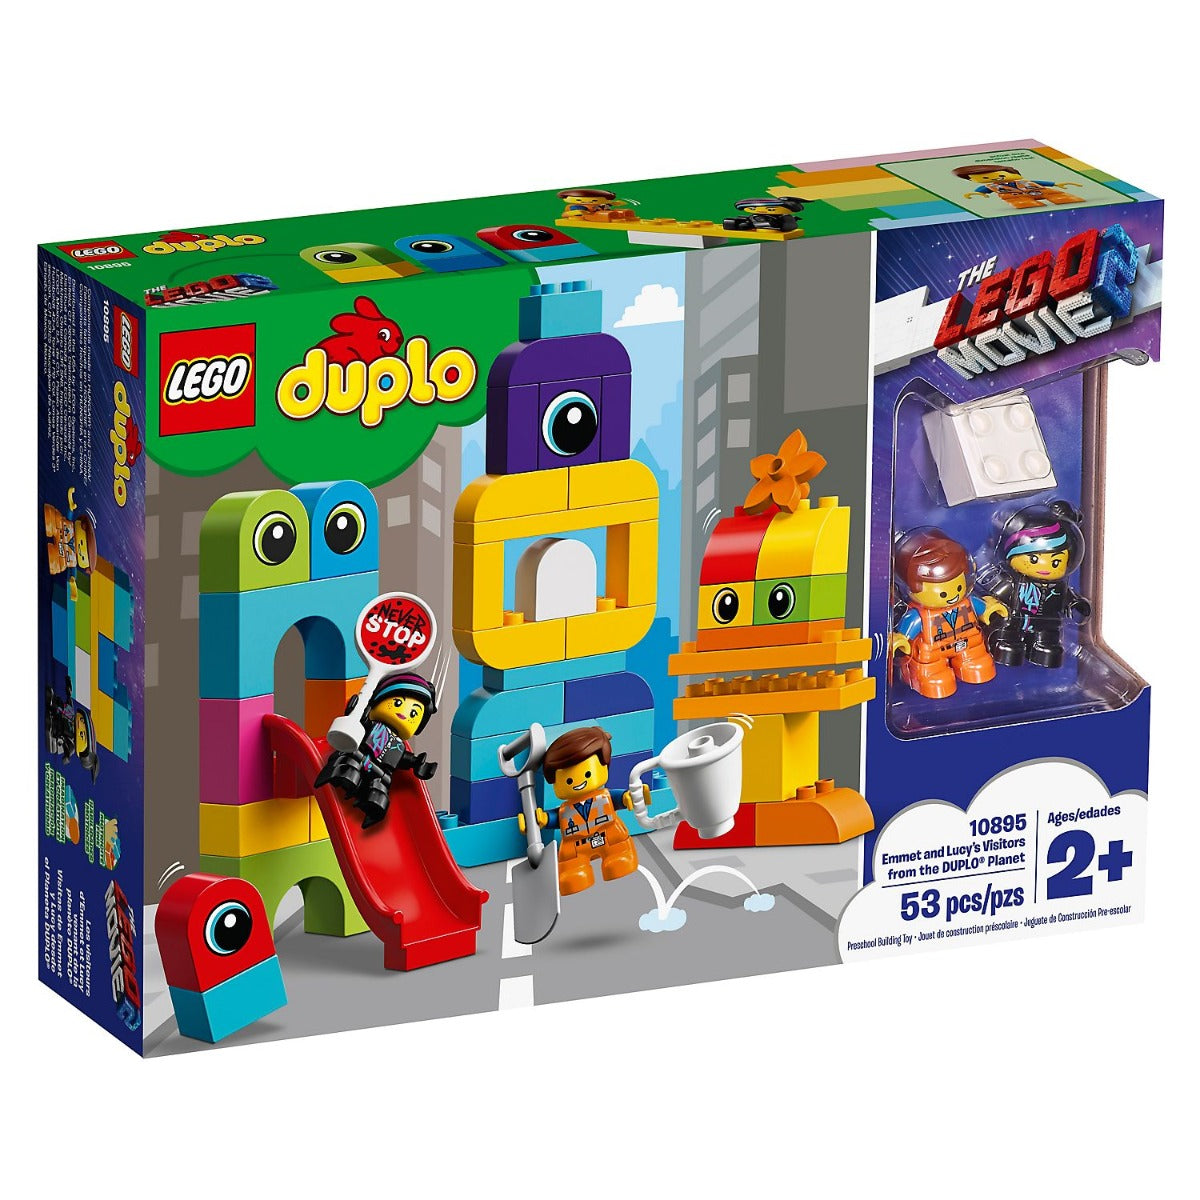 Lego Duplo Emmet & Lucy's Visitors from the DUPLO Planet 10895